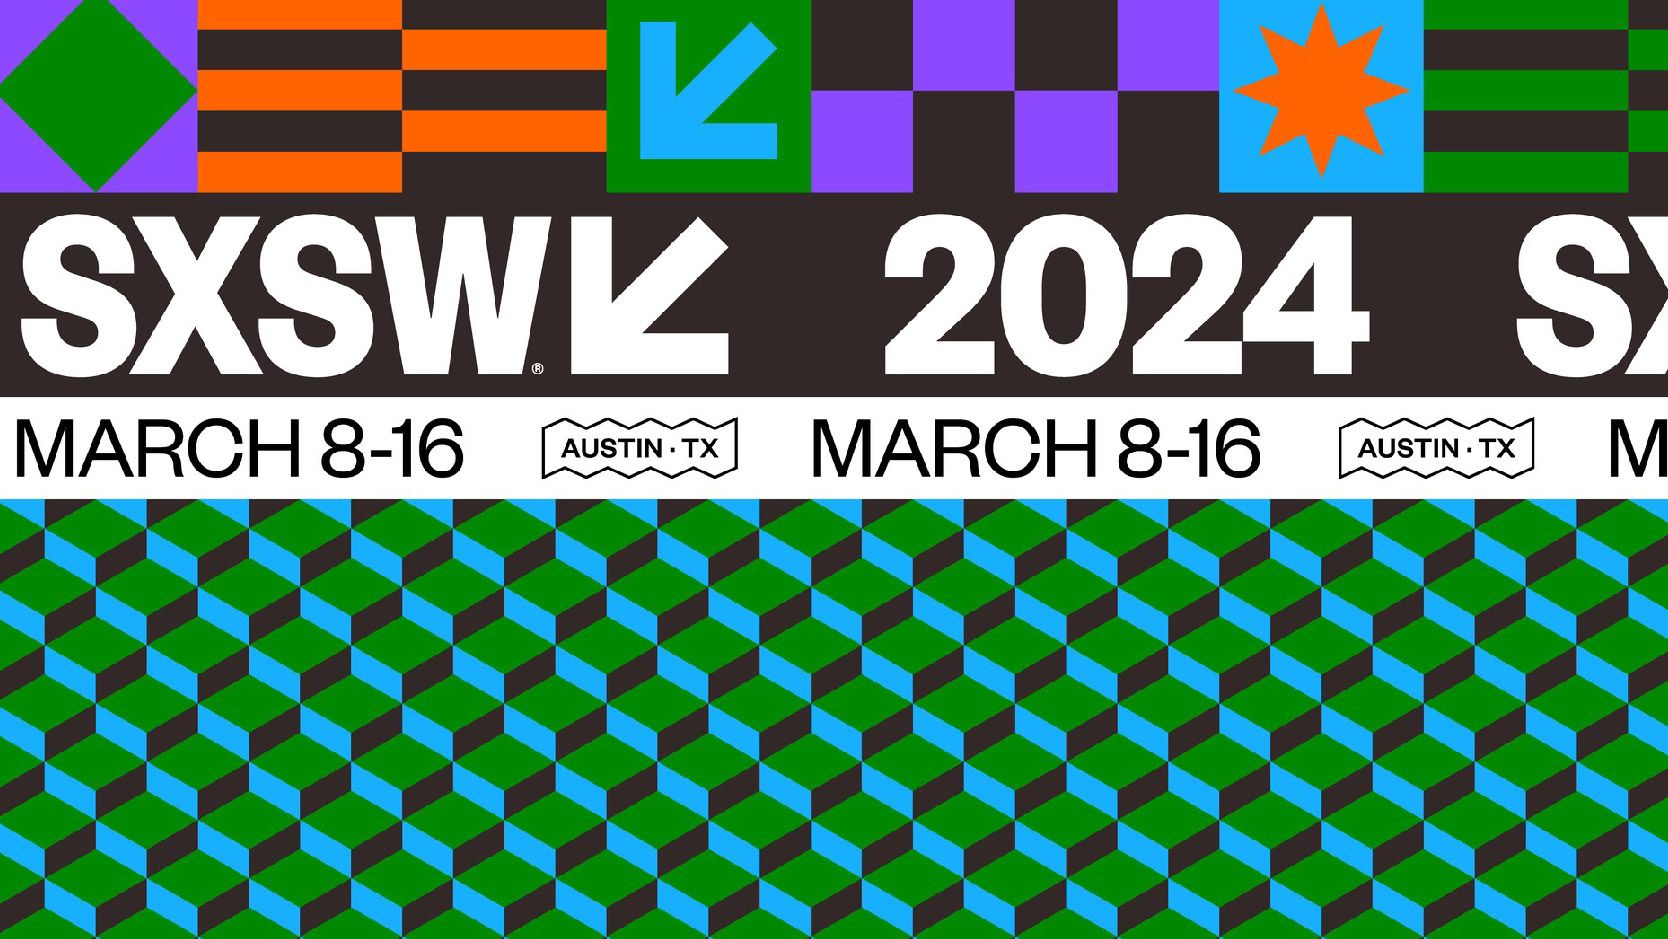 South by Southwest (SXSW) cover